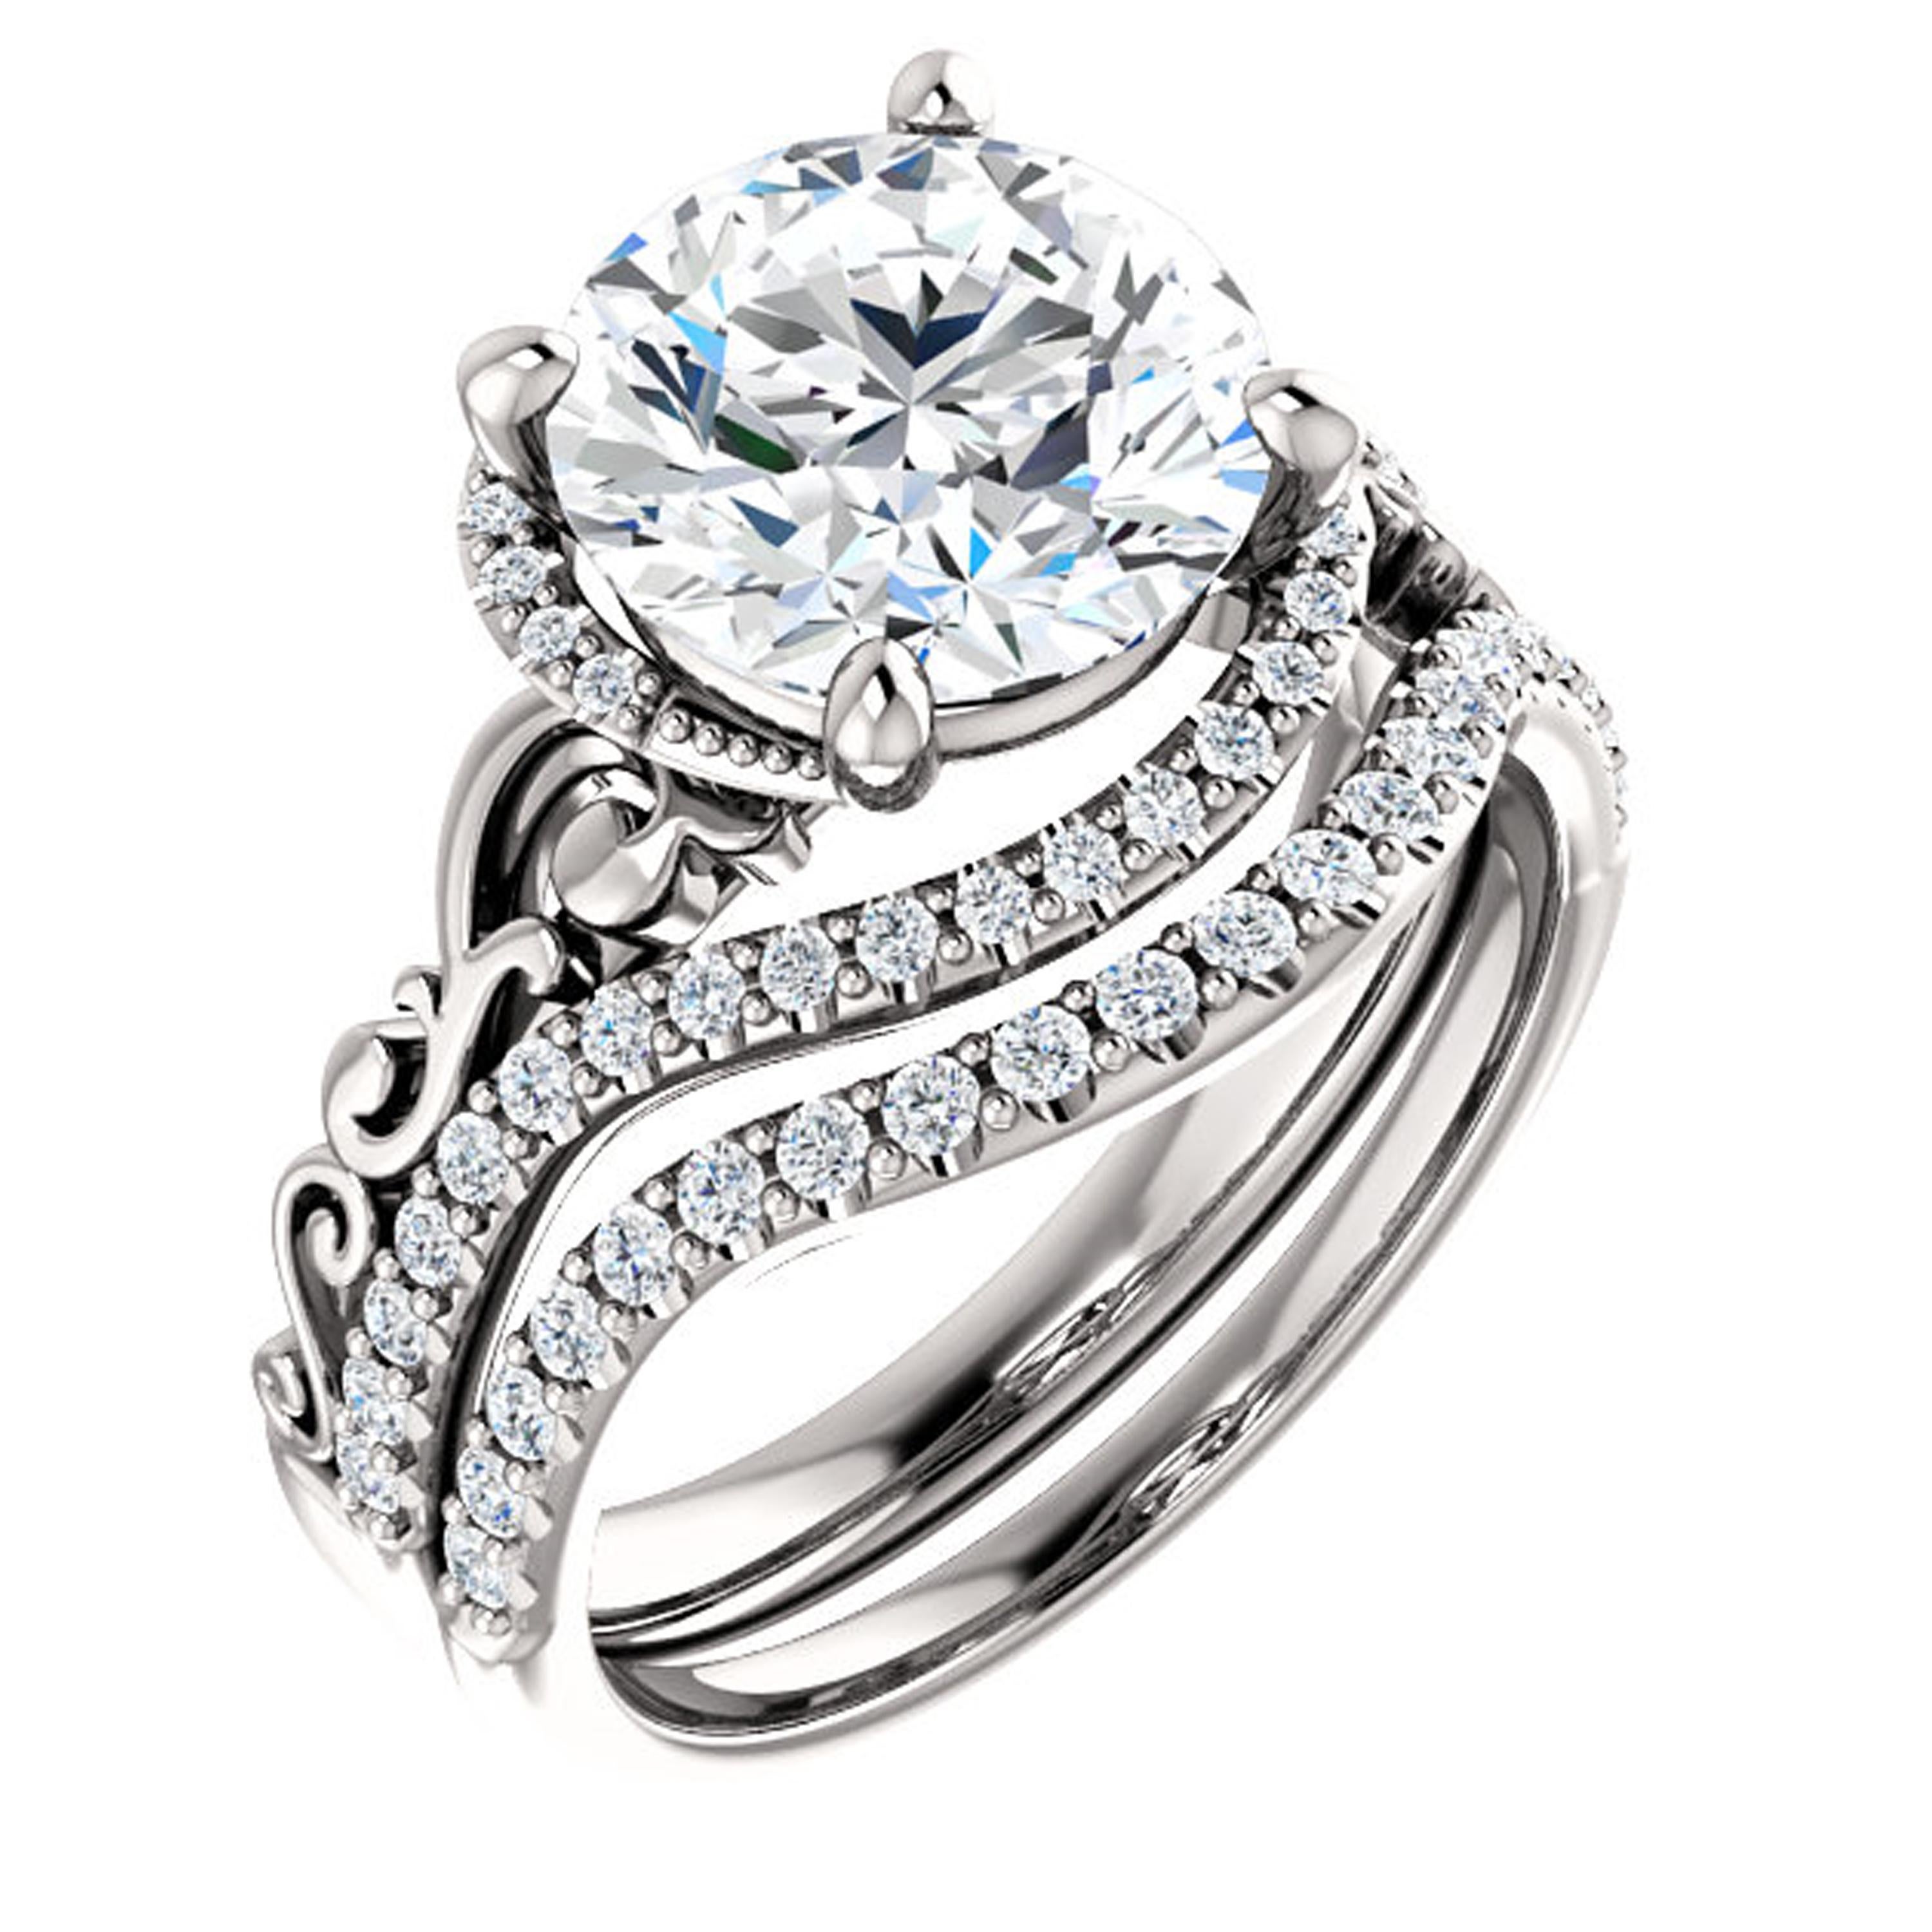 Showcasing a vintage style, adorable filigrees decorate the shank of this unique engagement ring. Lustrous white diamonds surround the halo, enhancing the GIA certified center diamond. Valorenna's high-polish strikes unmatched brilliance.
Matching